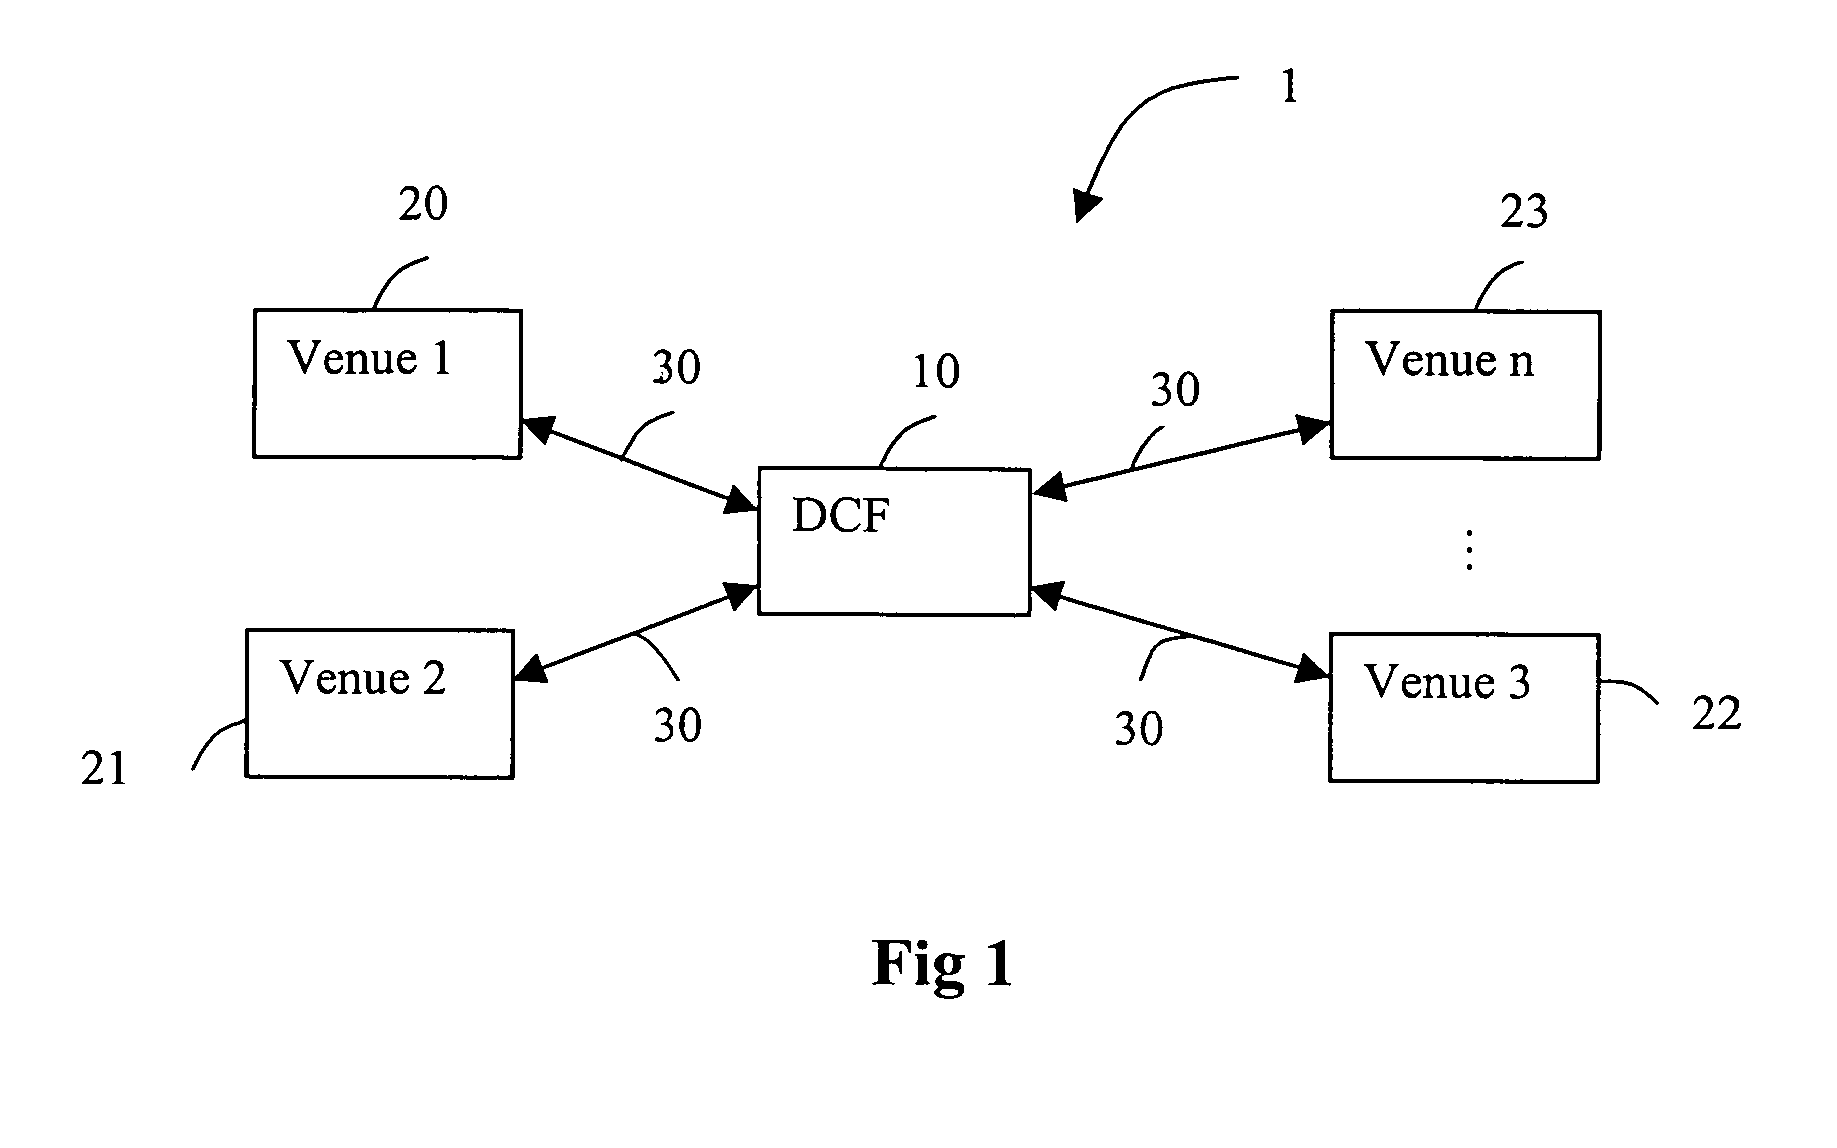 Method and system for tracking computer hardware and software assets by allocating and tagging the asset with an asset tag barcode having a software distribution system (SDS) number and verifying the asset tag barcode upon entry of the asset at a destination site